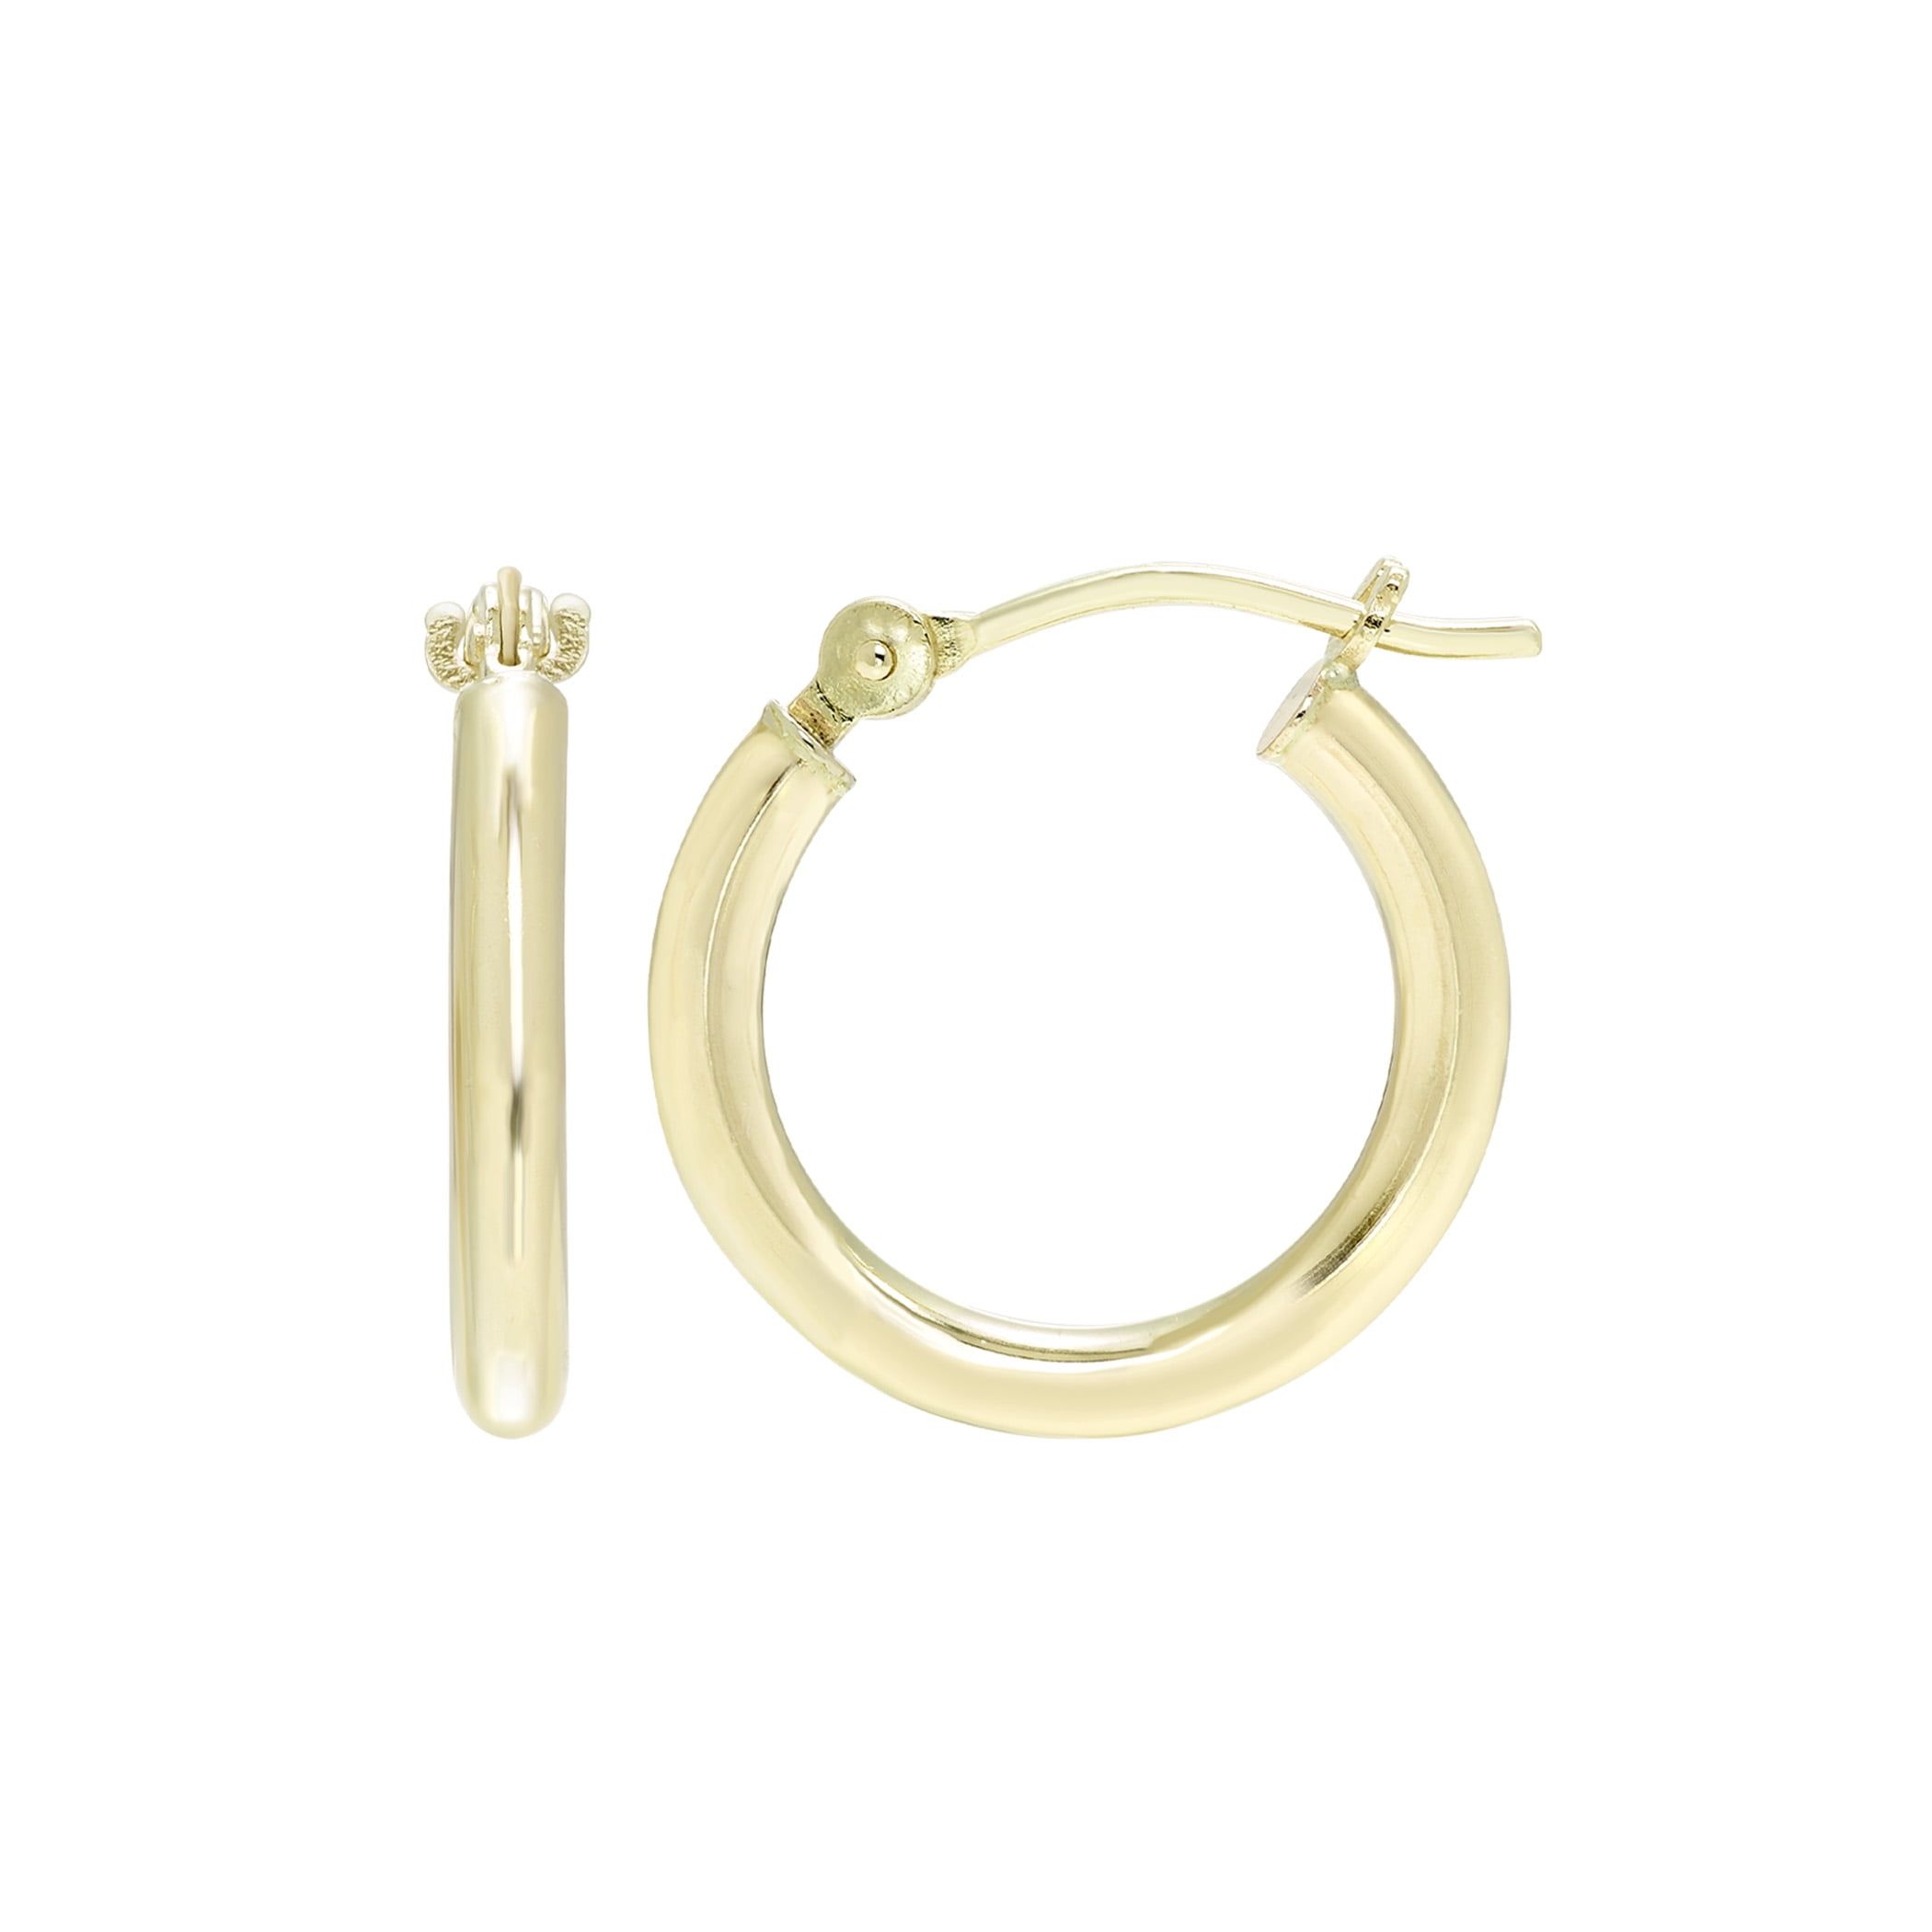 14k Yellow Gold 2mm Polished Hoop Earrings 12mm to 30mm Women Girls cba4ff52 6889 42ae 9697 b3703085953e.92e24076c13fee23fbd822d25b5a0f3e